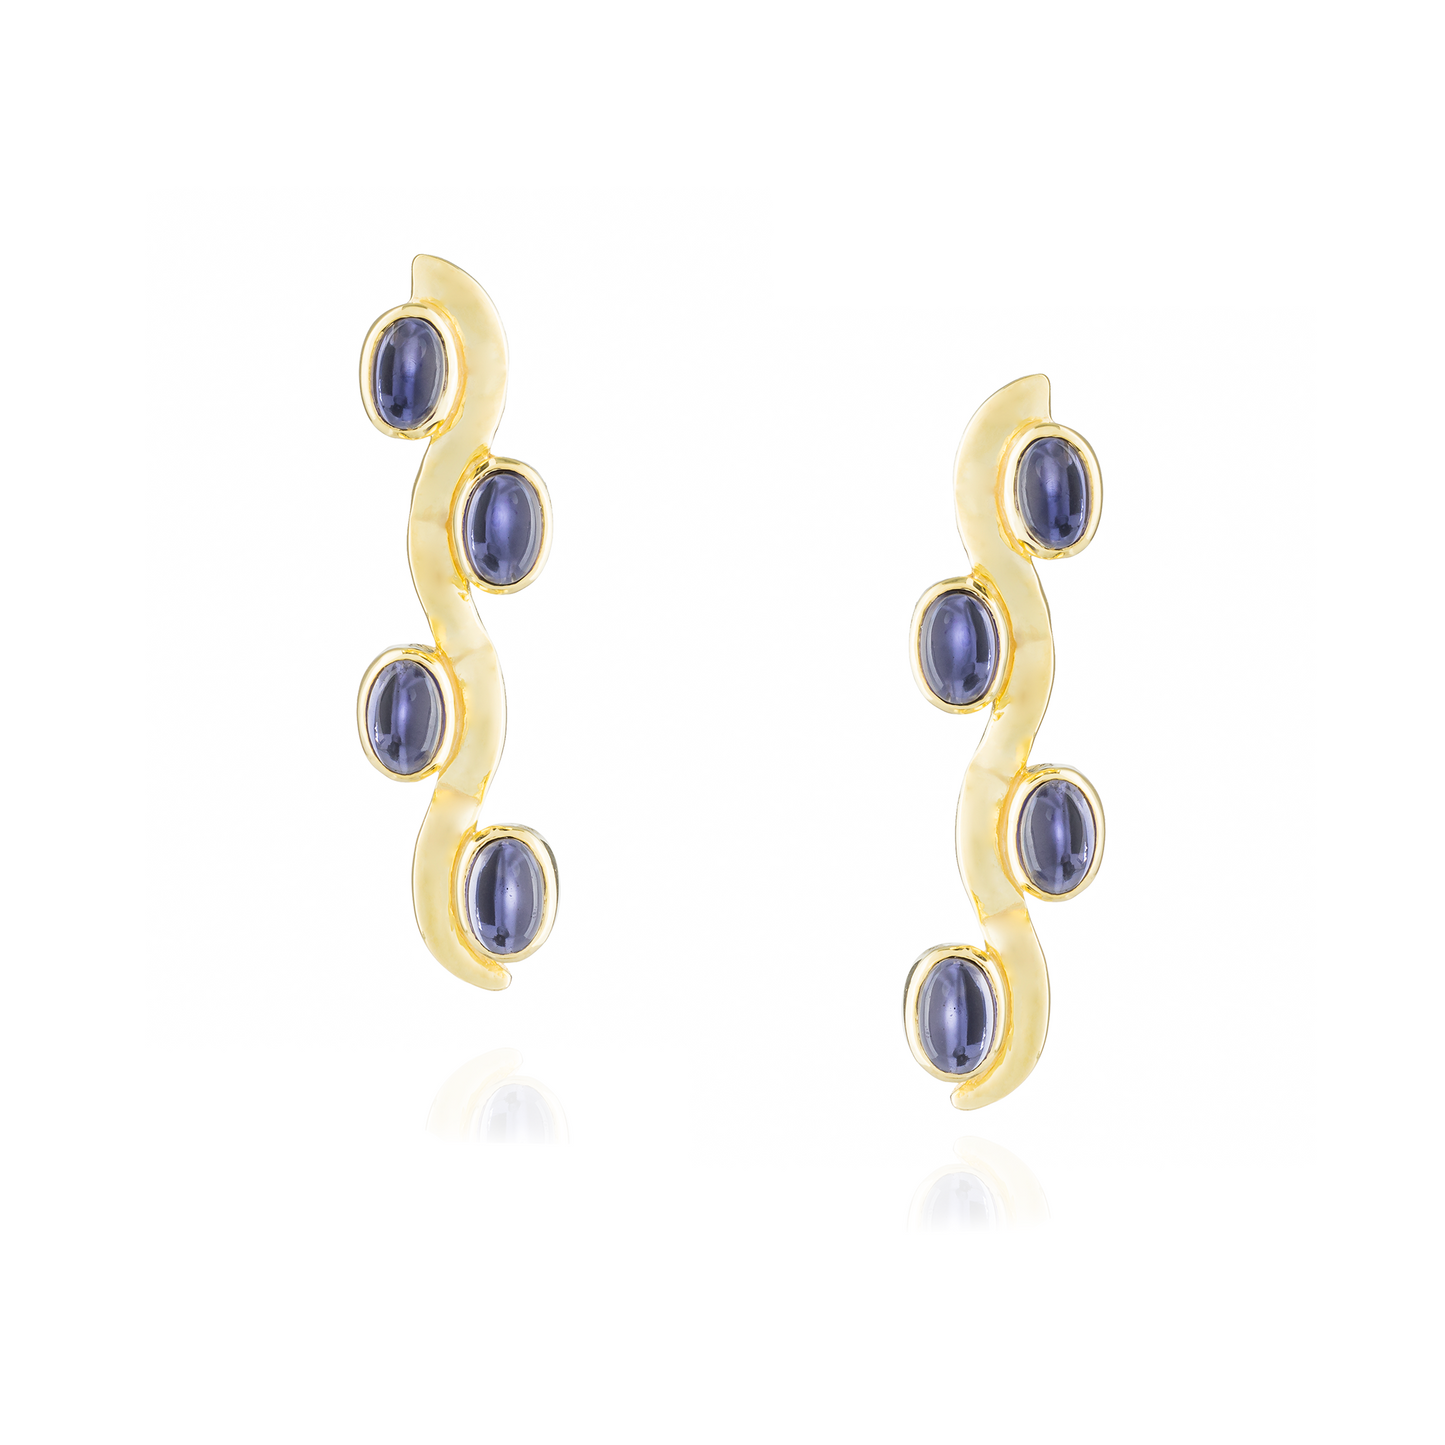 925 Silver Earrings plated in 18k Yellow Gold with Iolite Cabouchon